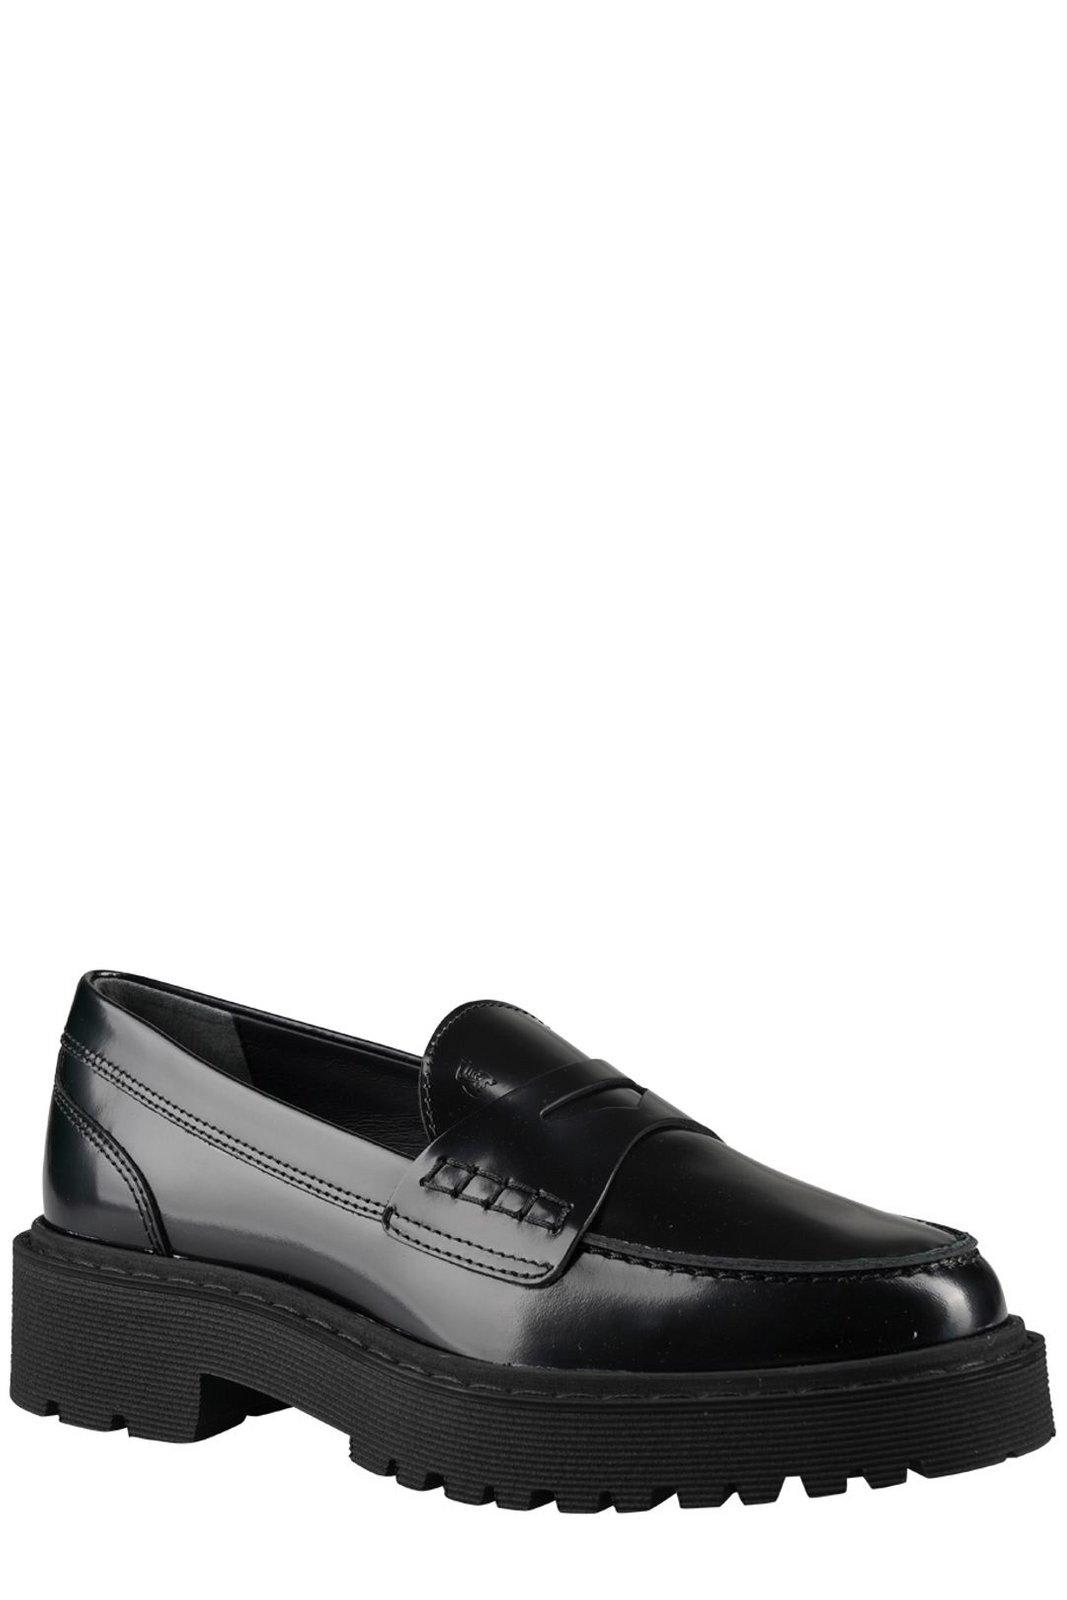 Shop Hogan Classic Slip-on Loafers In Black